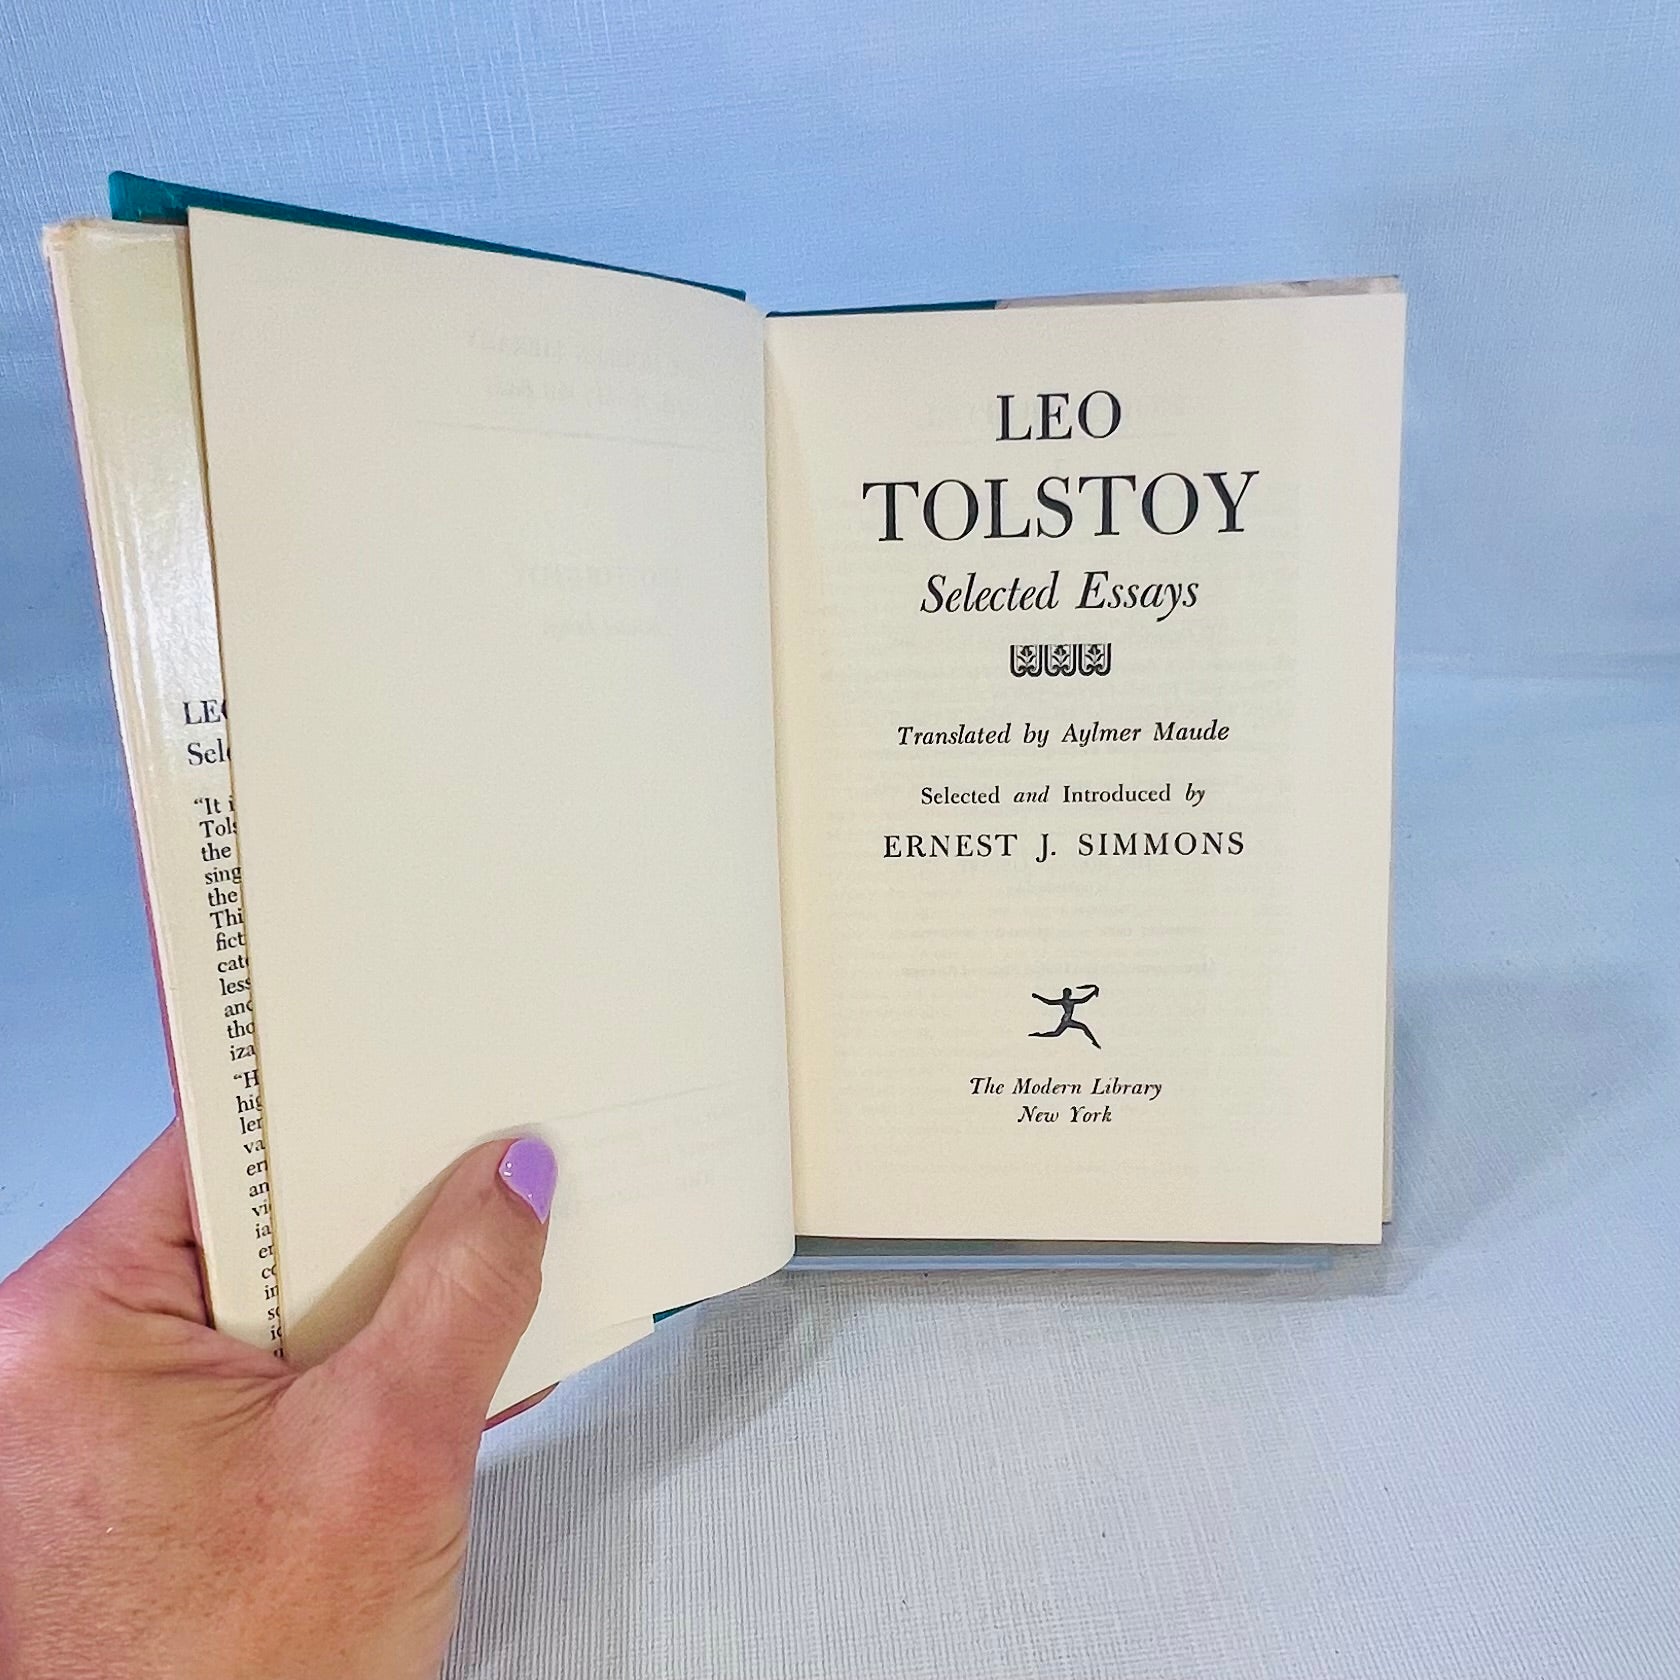 Leo Tolstoy Selected Essays translated by Almere Maude Introduced by Ernest J. Simmons 1964 A Modern Library Book